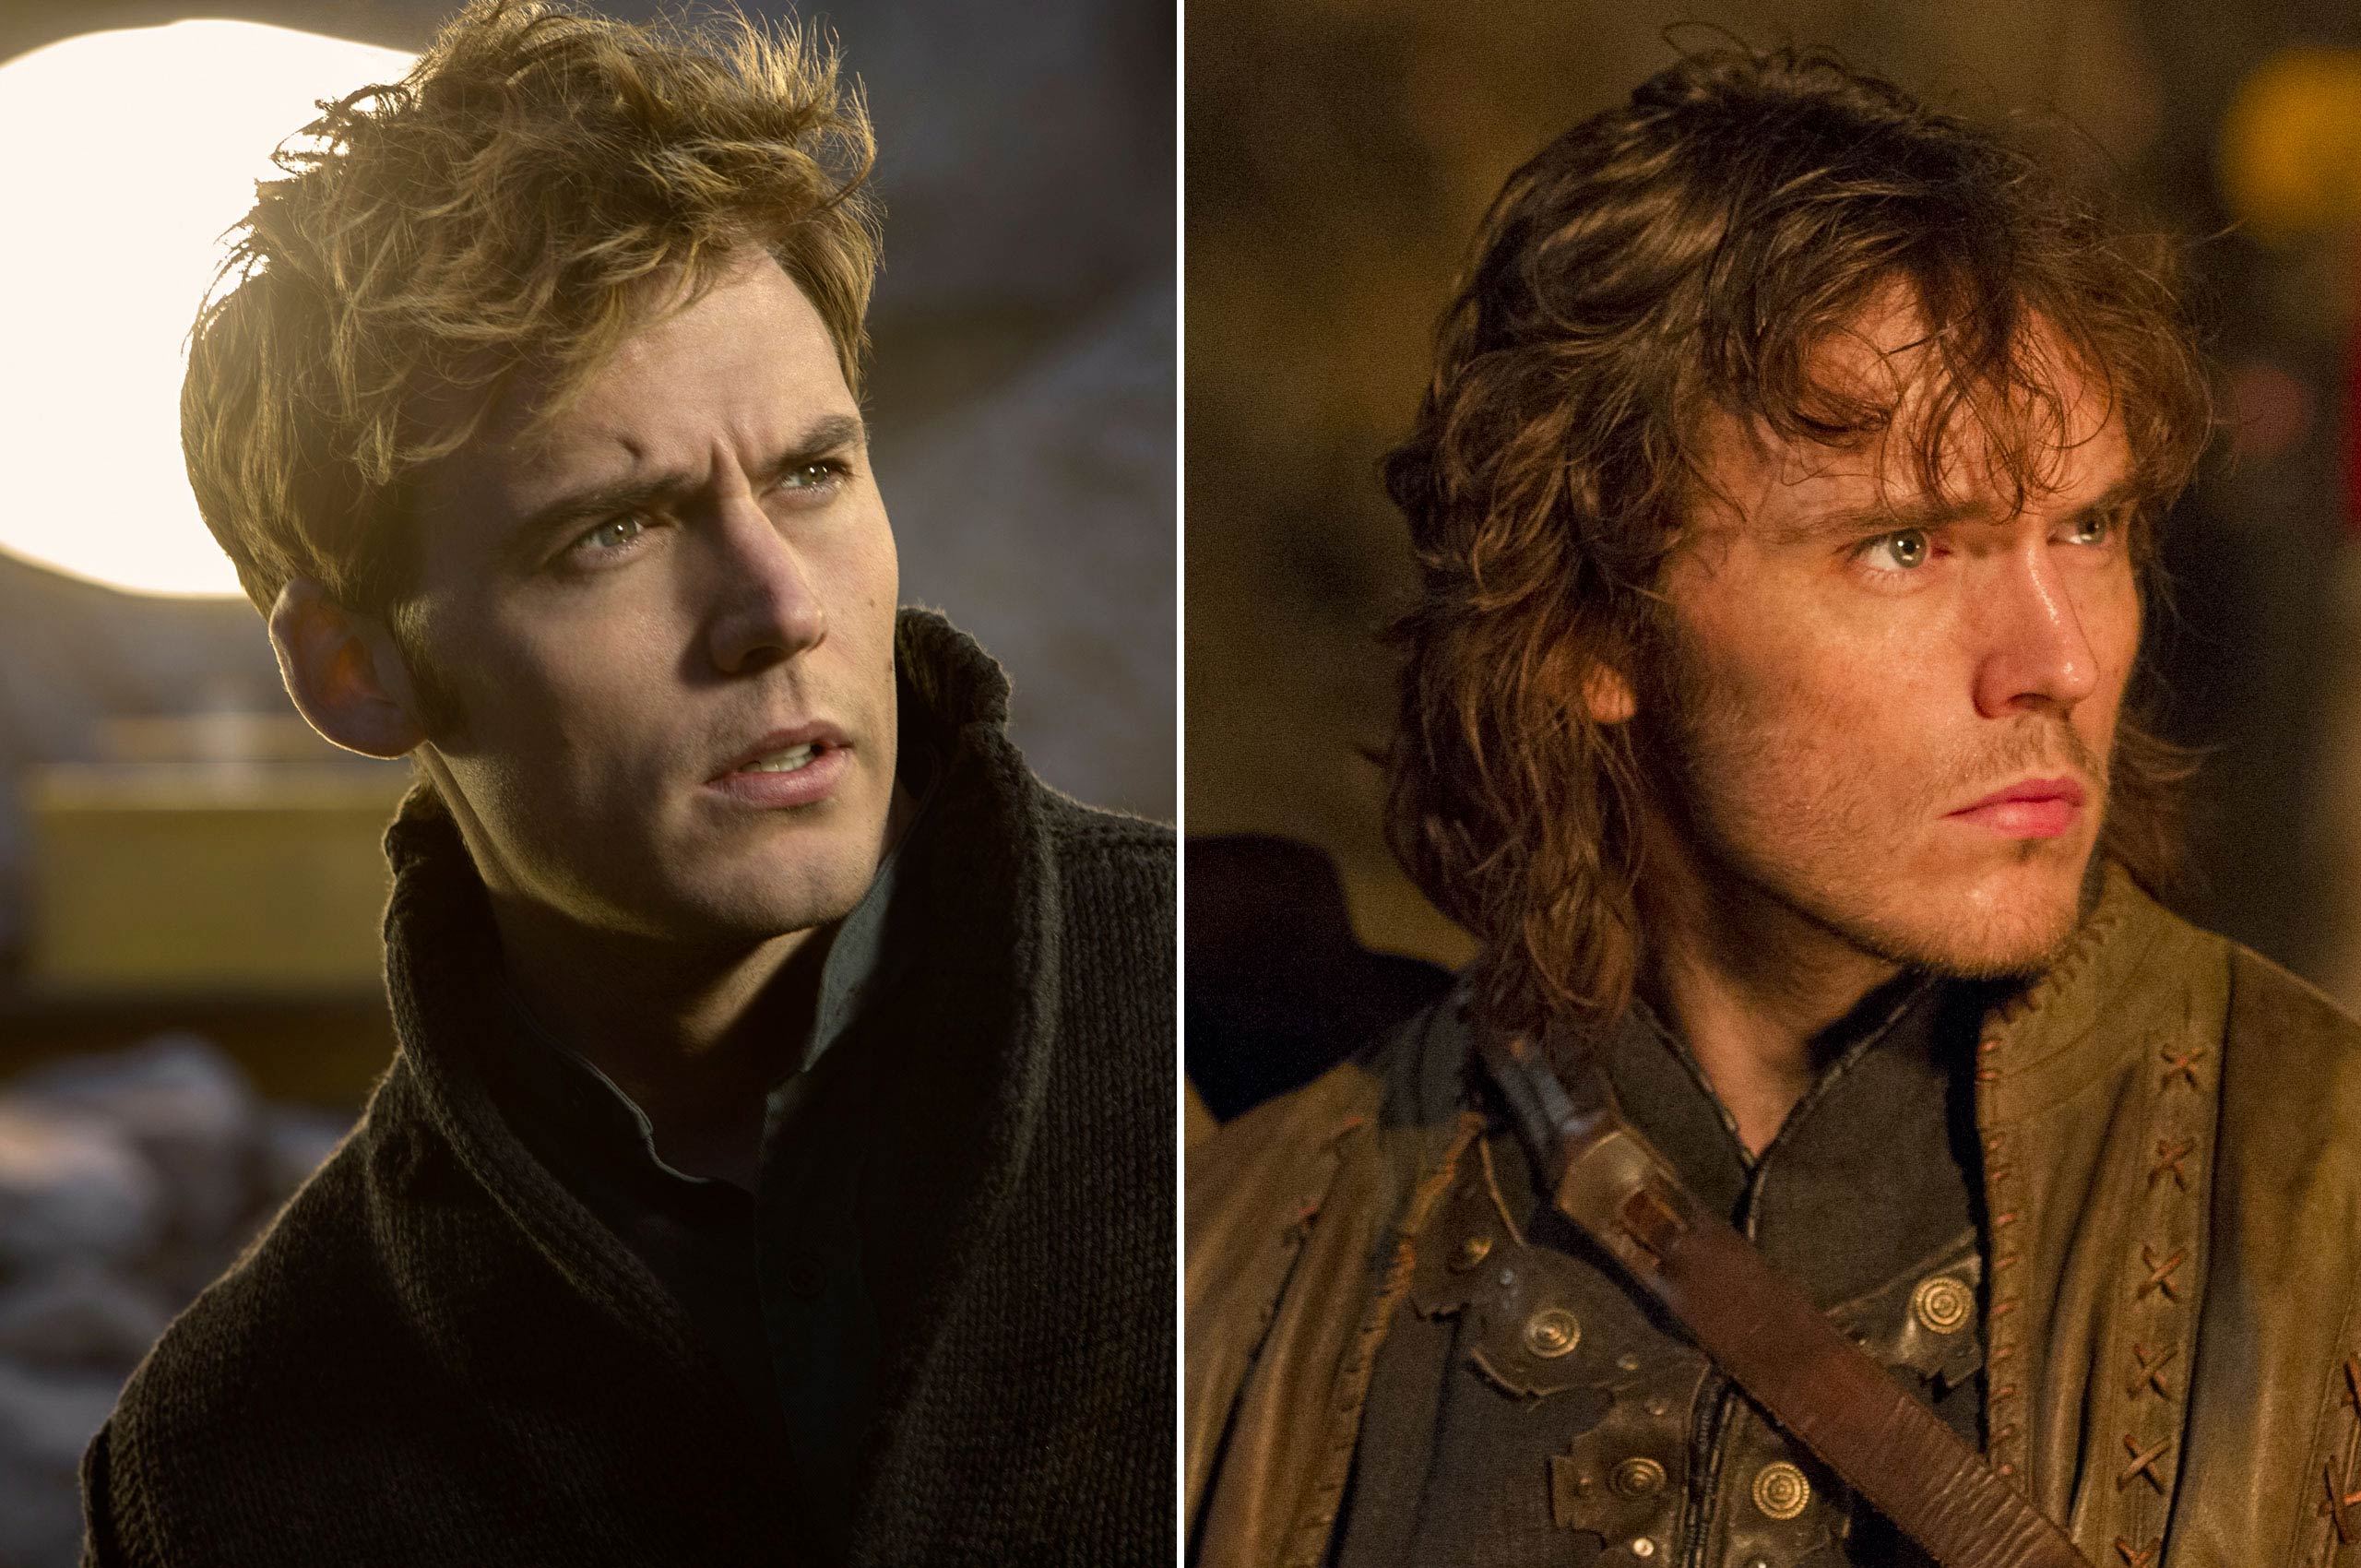 Sam Claflin plays Finnick Odair, the charismatic victor from District 4, and was also William, Snow White’s childhood friend, in the 2012 fantasy film Snow White and the Huntsman.